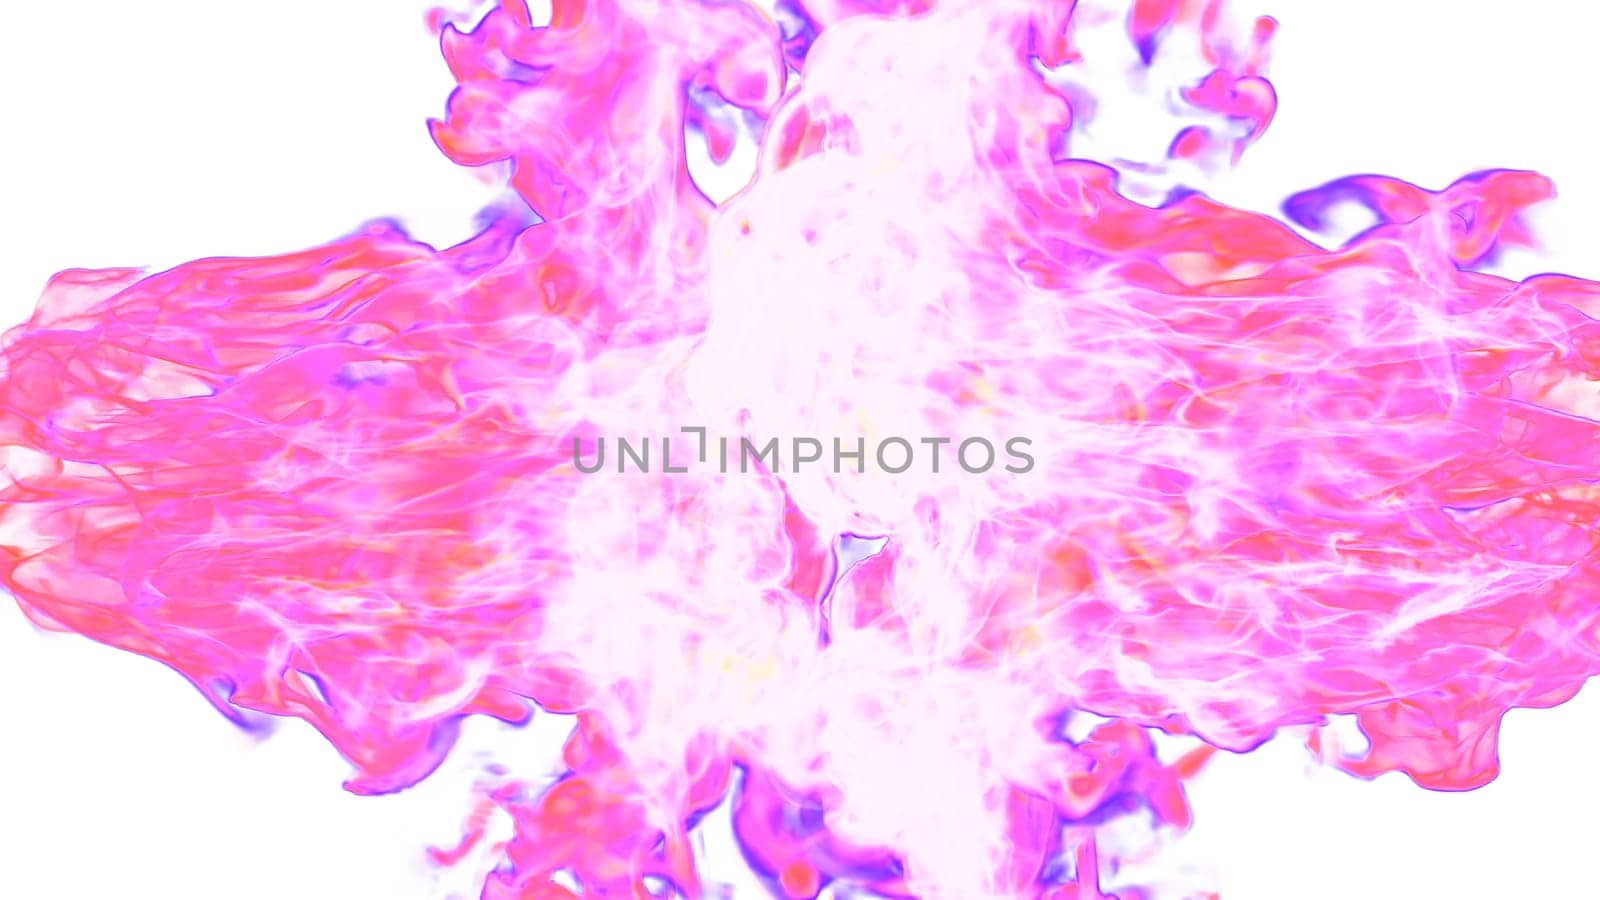 3d illustration. Tongues of pink flame collide from opposite sides on a white background